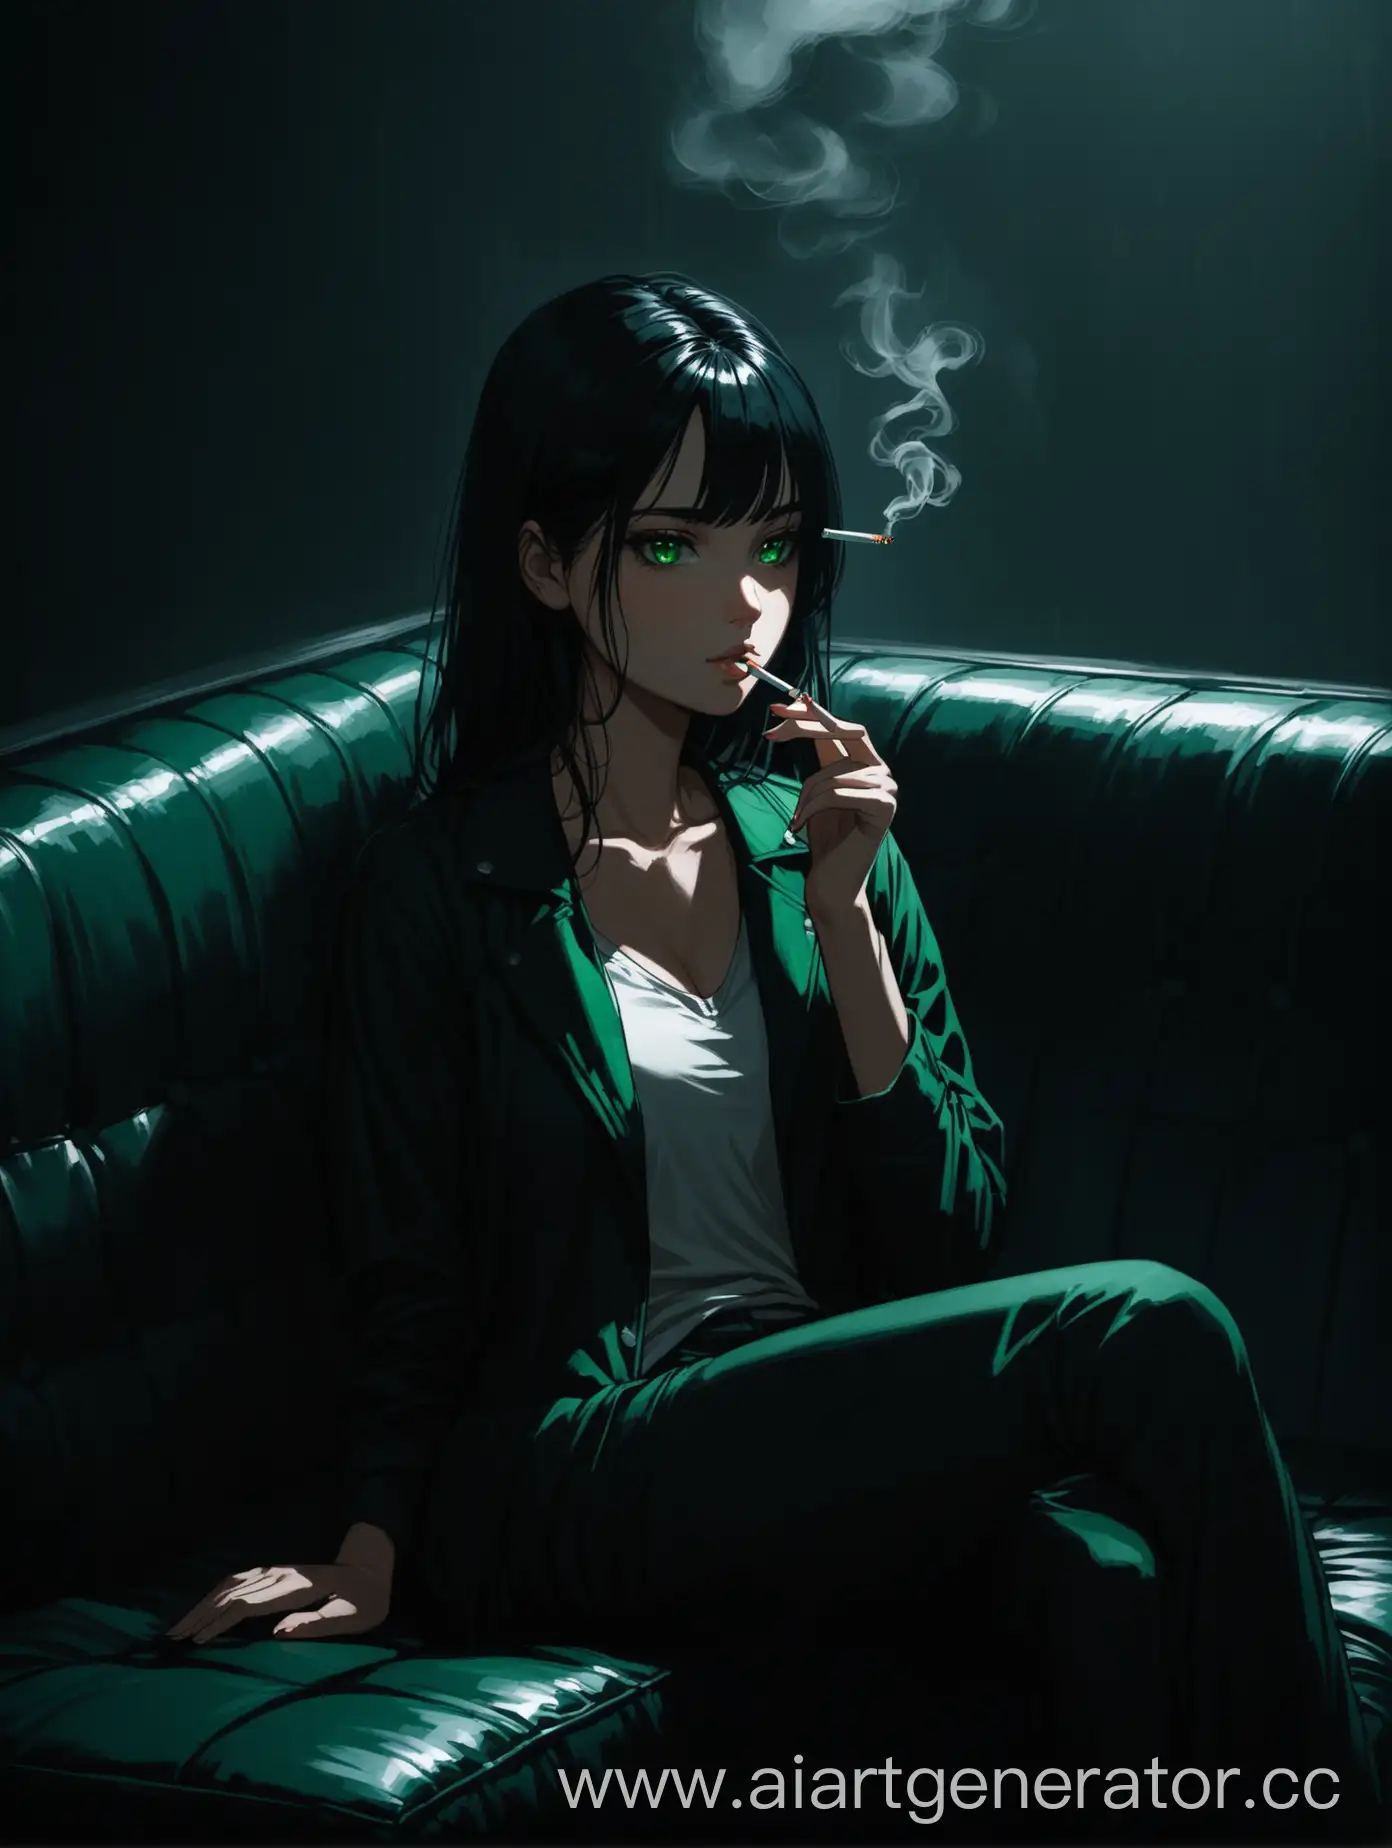 Relaxed-Girl-with-Black-Hair-Smoking-in-Dark-Room